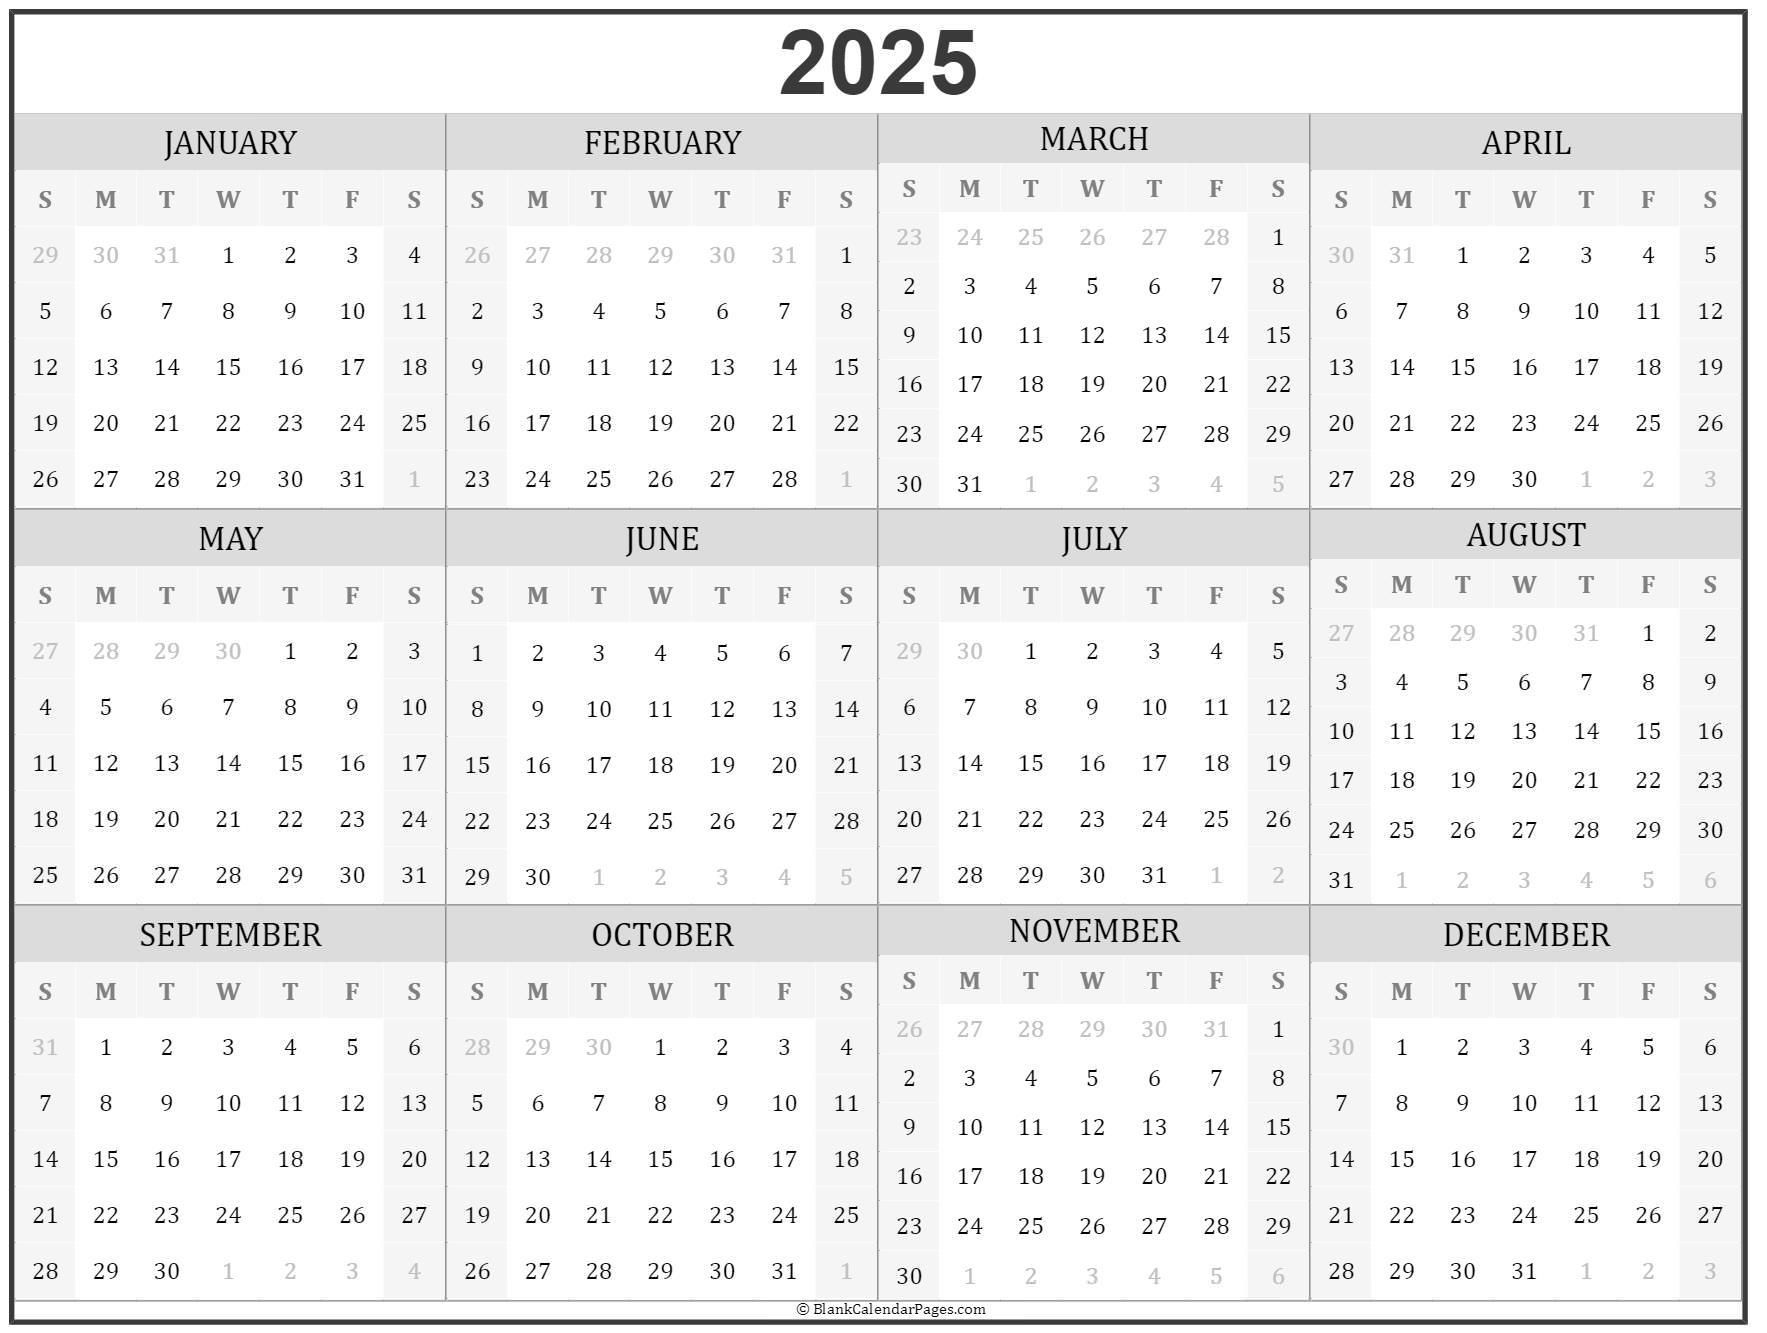 Yearly Calendar Printable 2025: A Comprehensive Guide To Planning Your ...